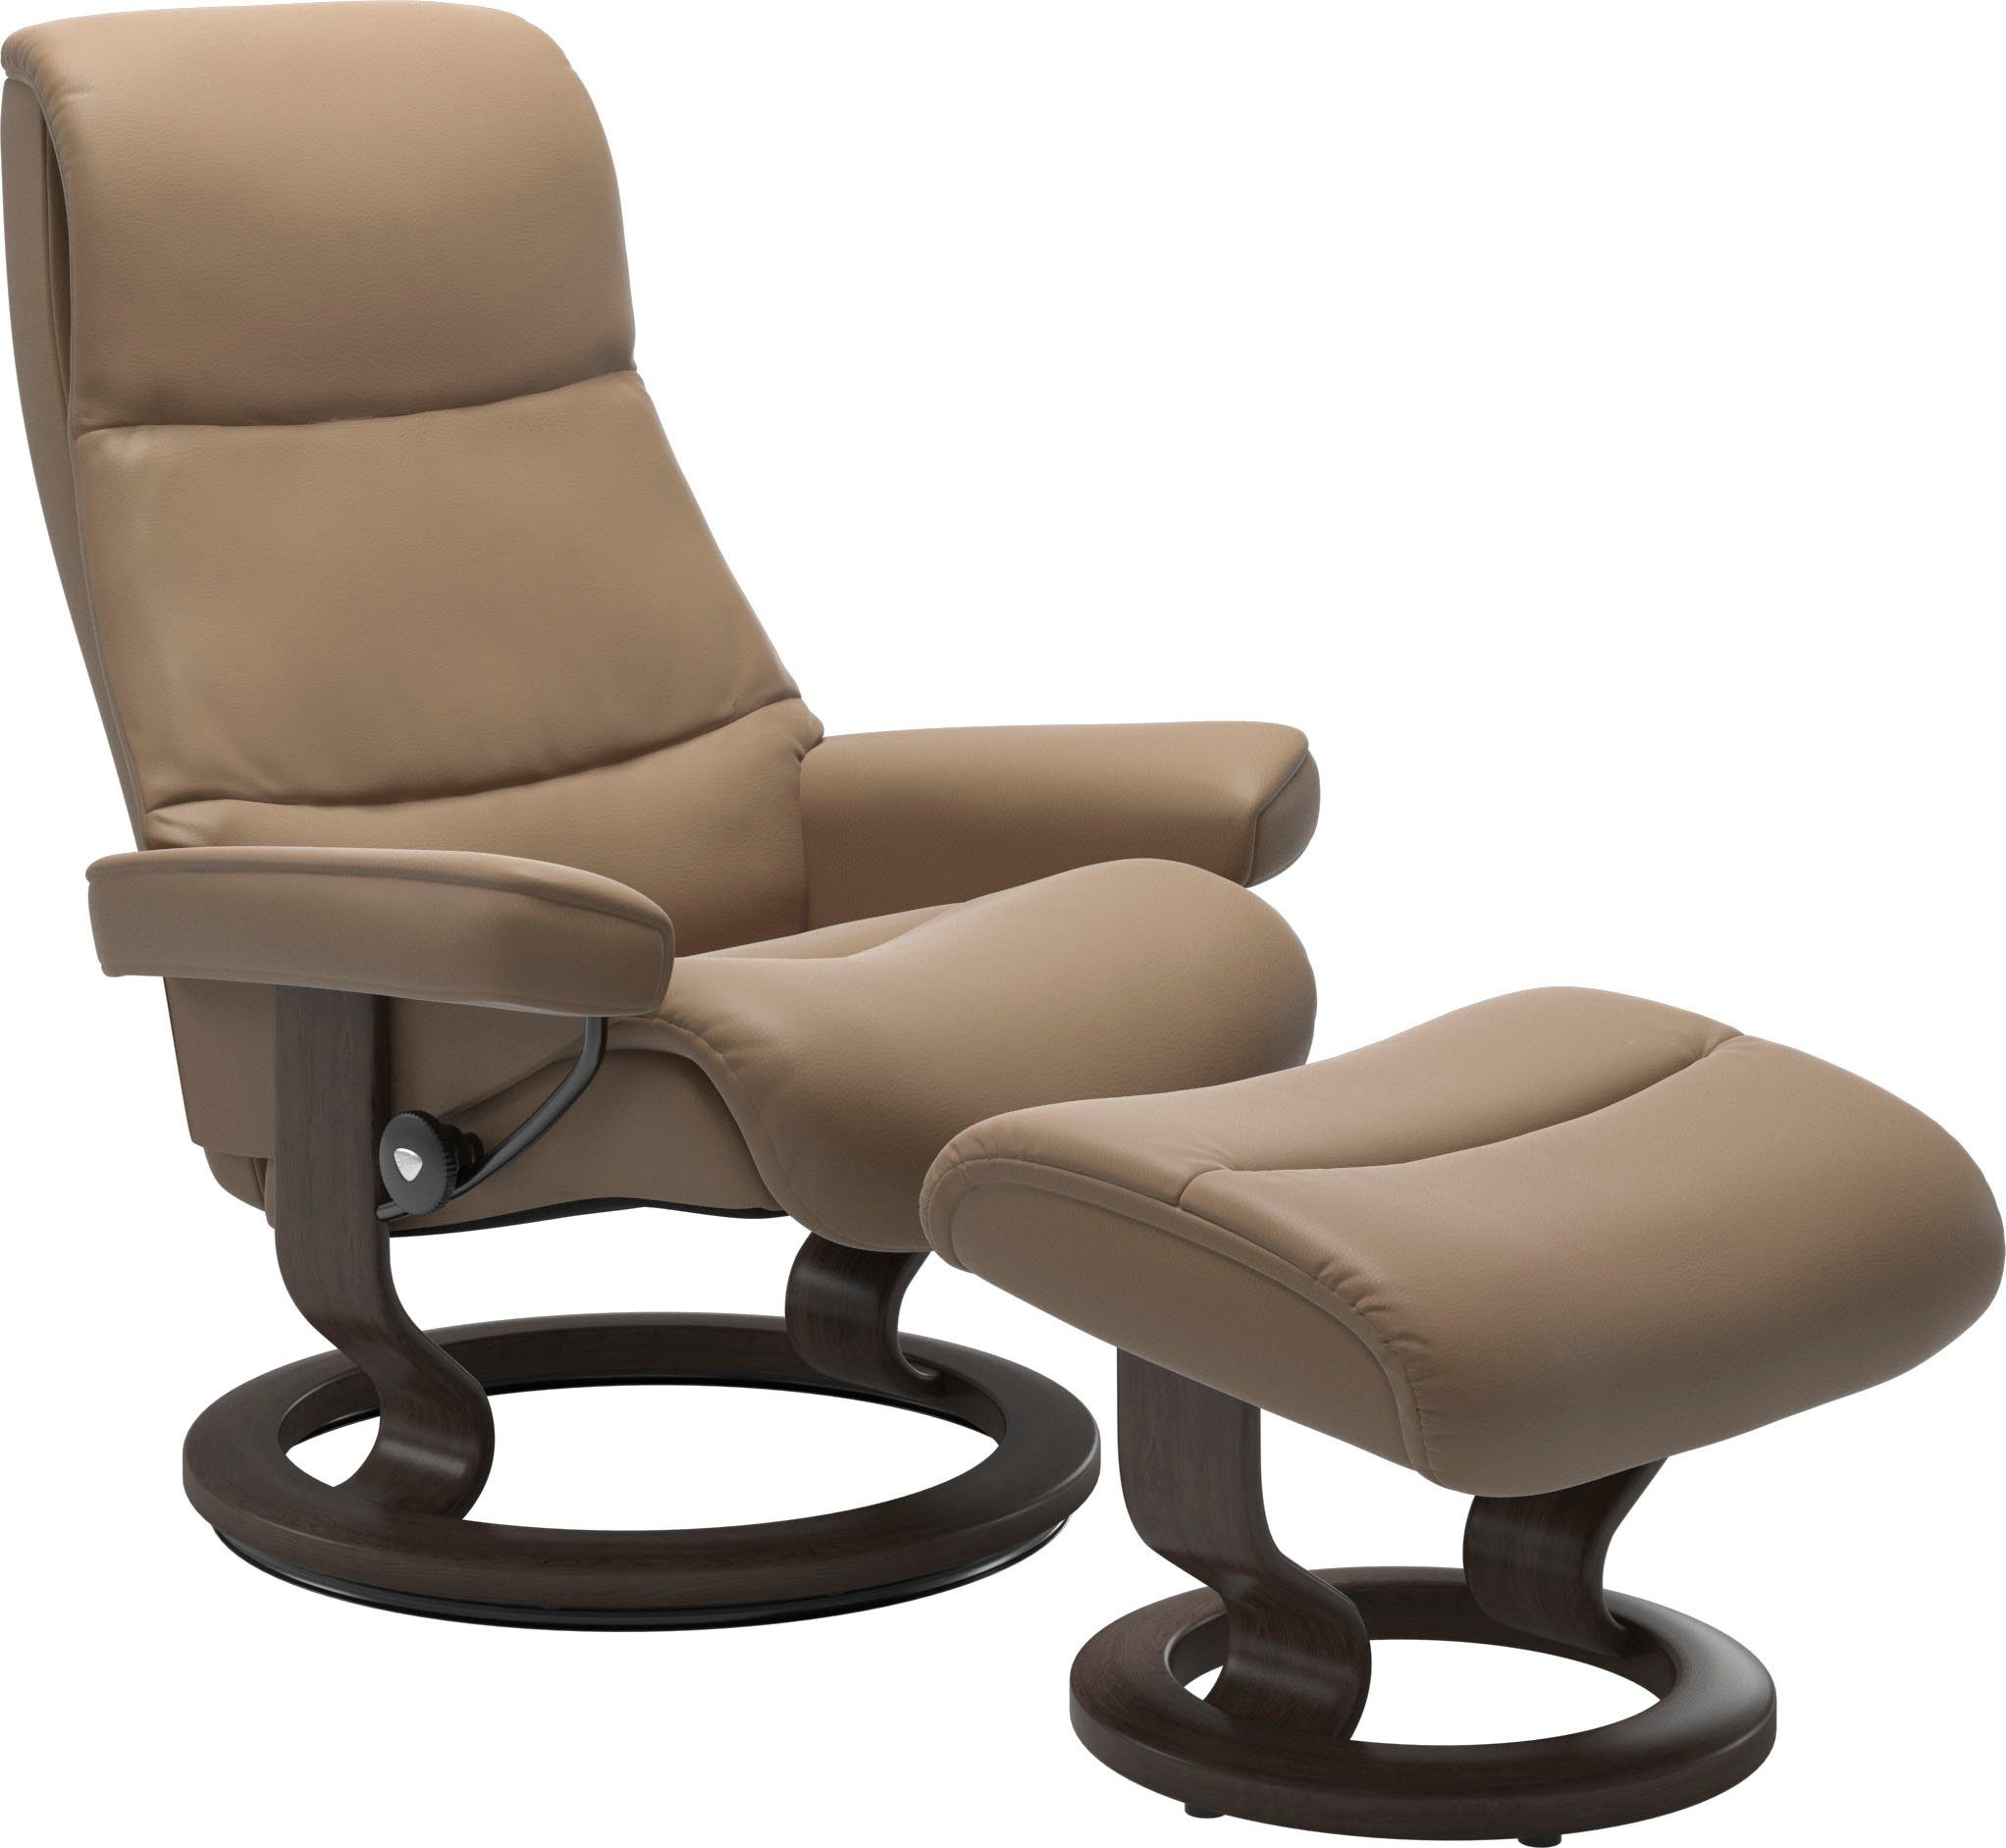 Stressless® Relaxsessel View, mit Classic Base, Größe M,Gestell Wenge